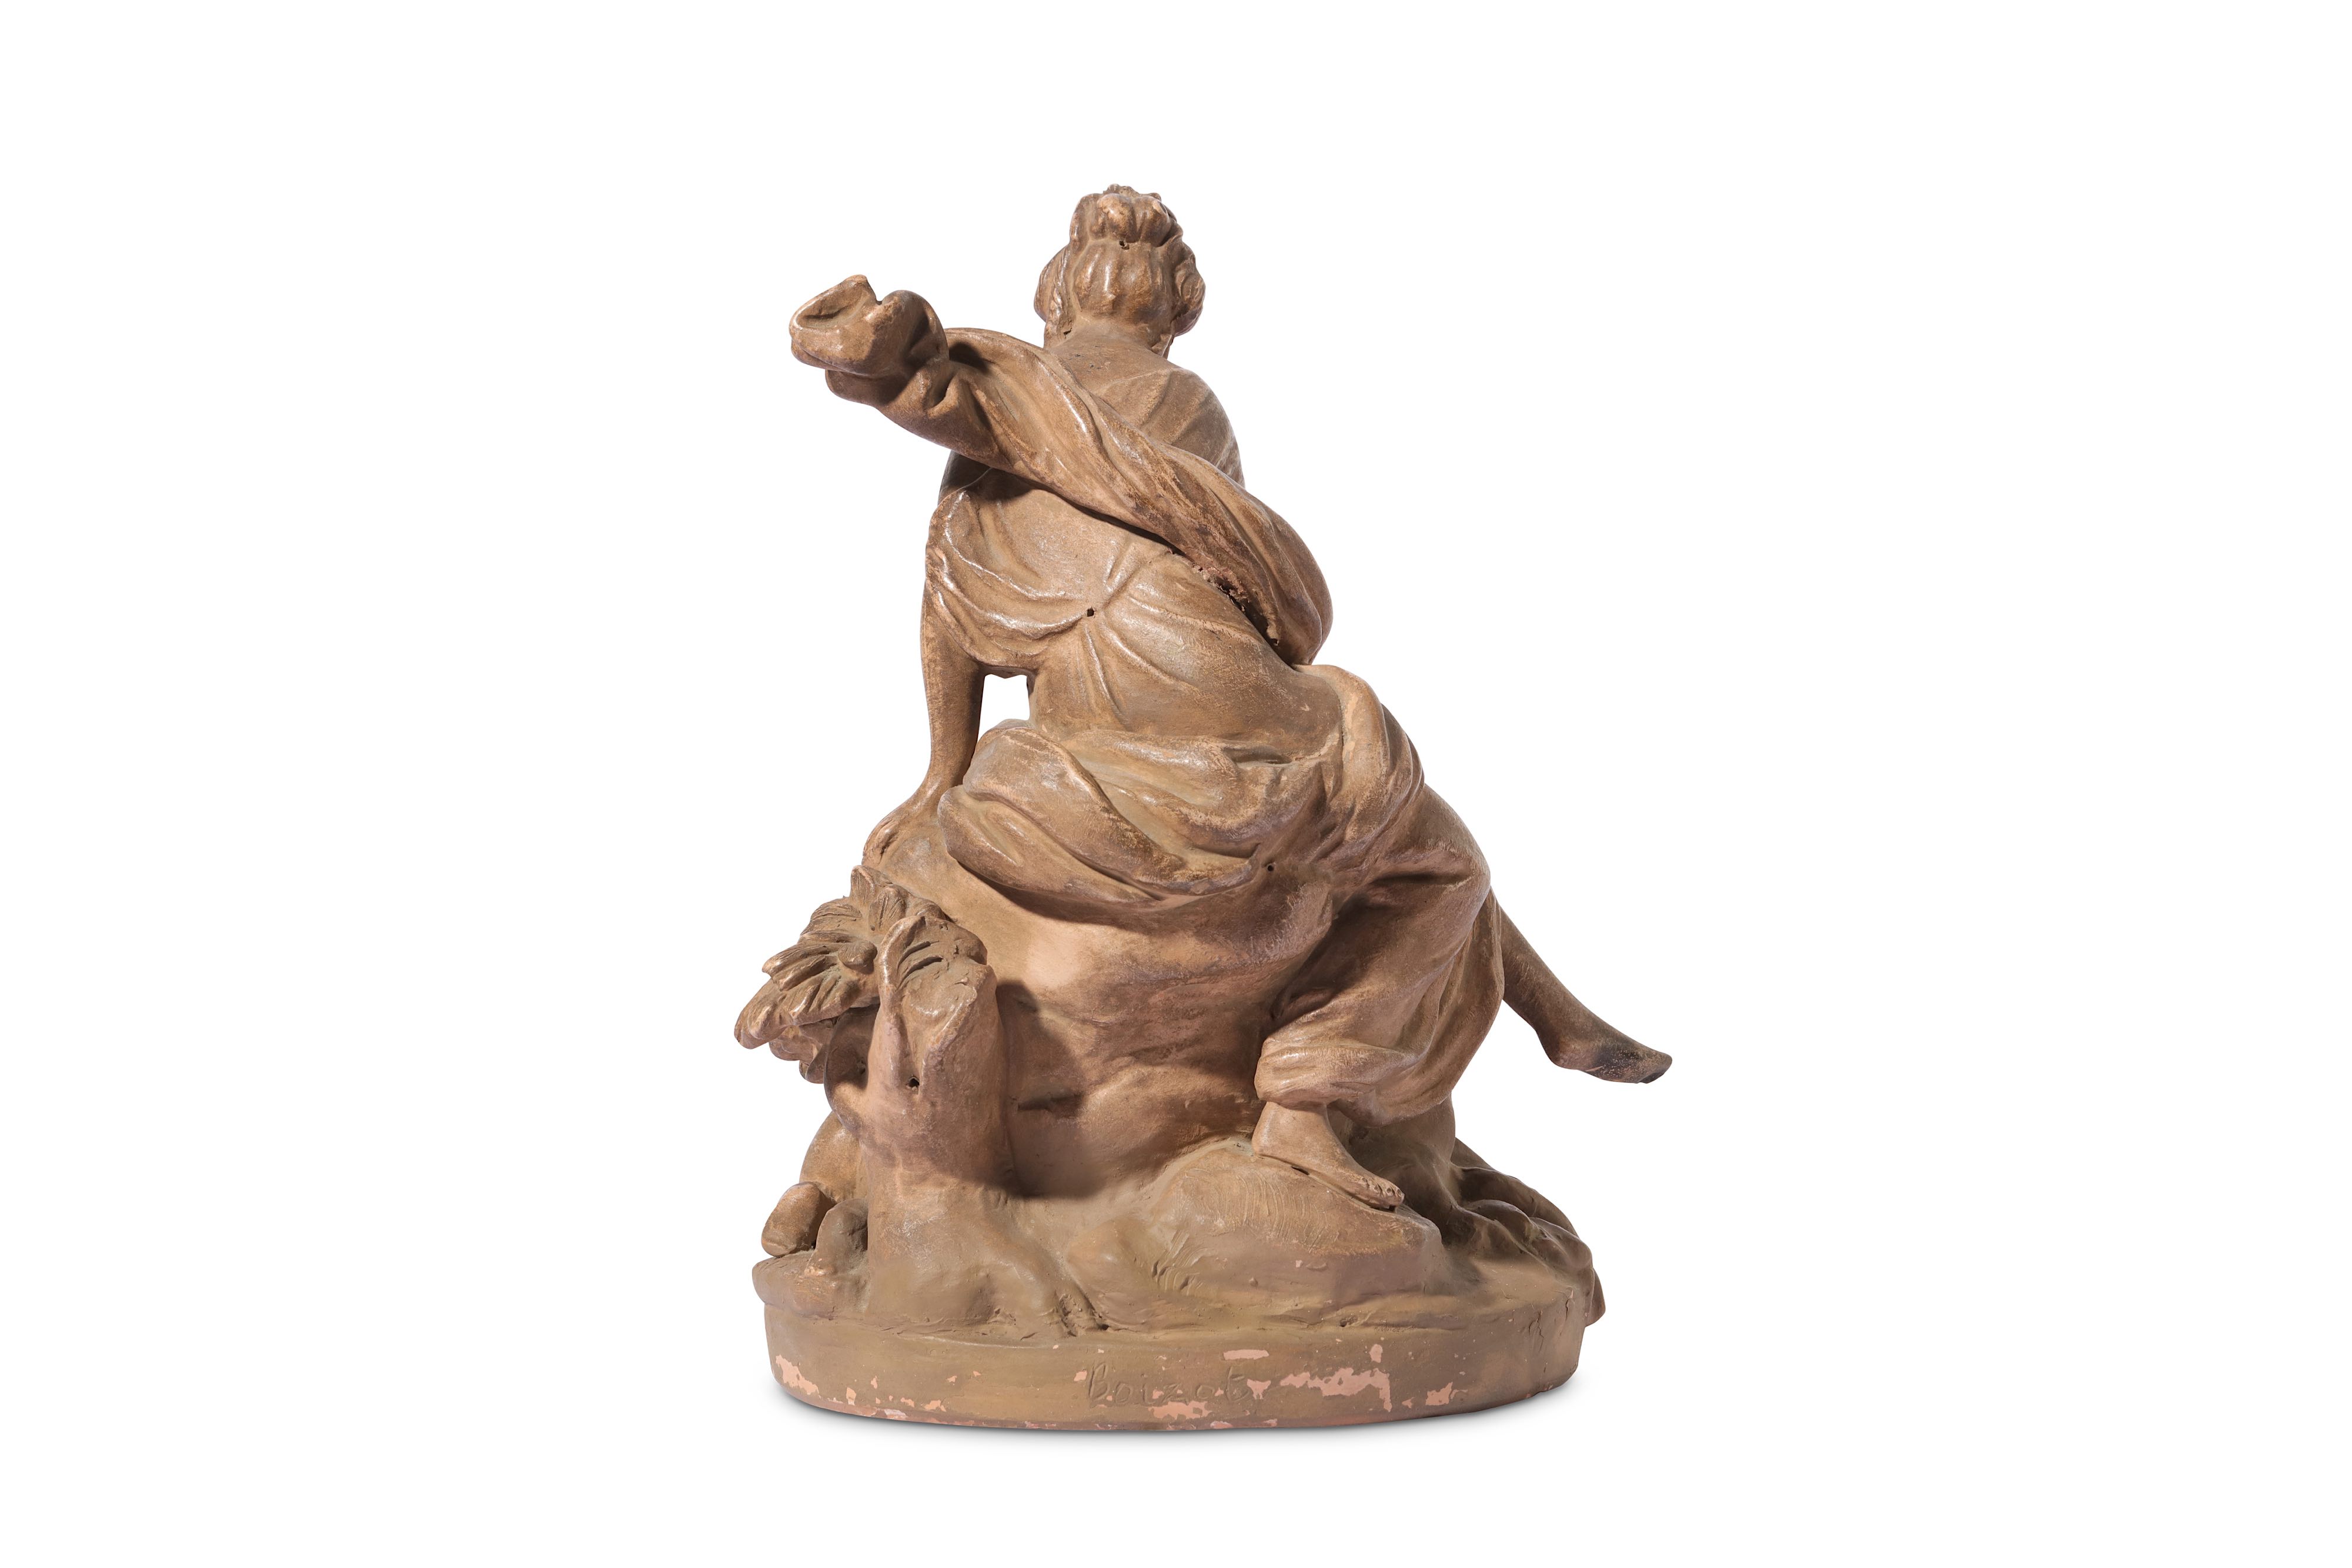 LOUIS-SIMON BOIZOT (FRENCH, 1743-1809): AN EARLY 19TH CENTURY TERRACOTTA MODEL OF VENUS AND CUPID EN - Image 3 of 9